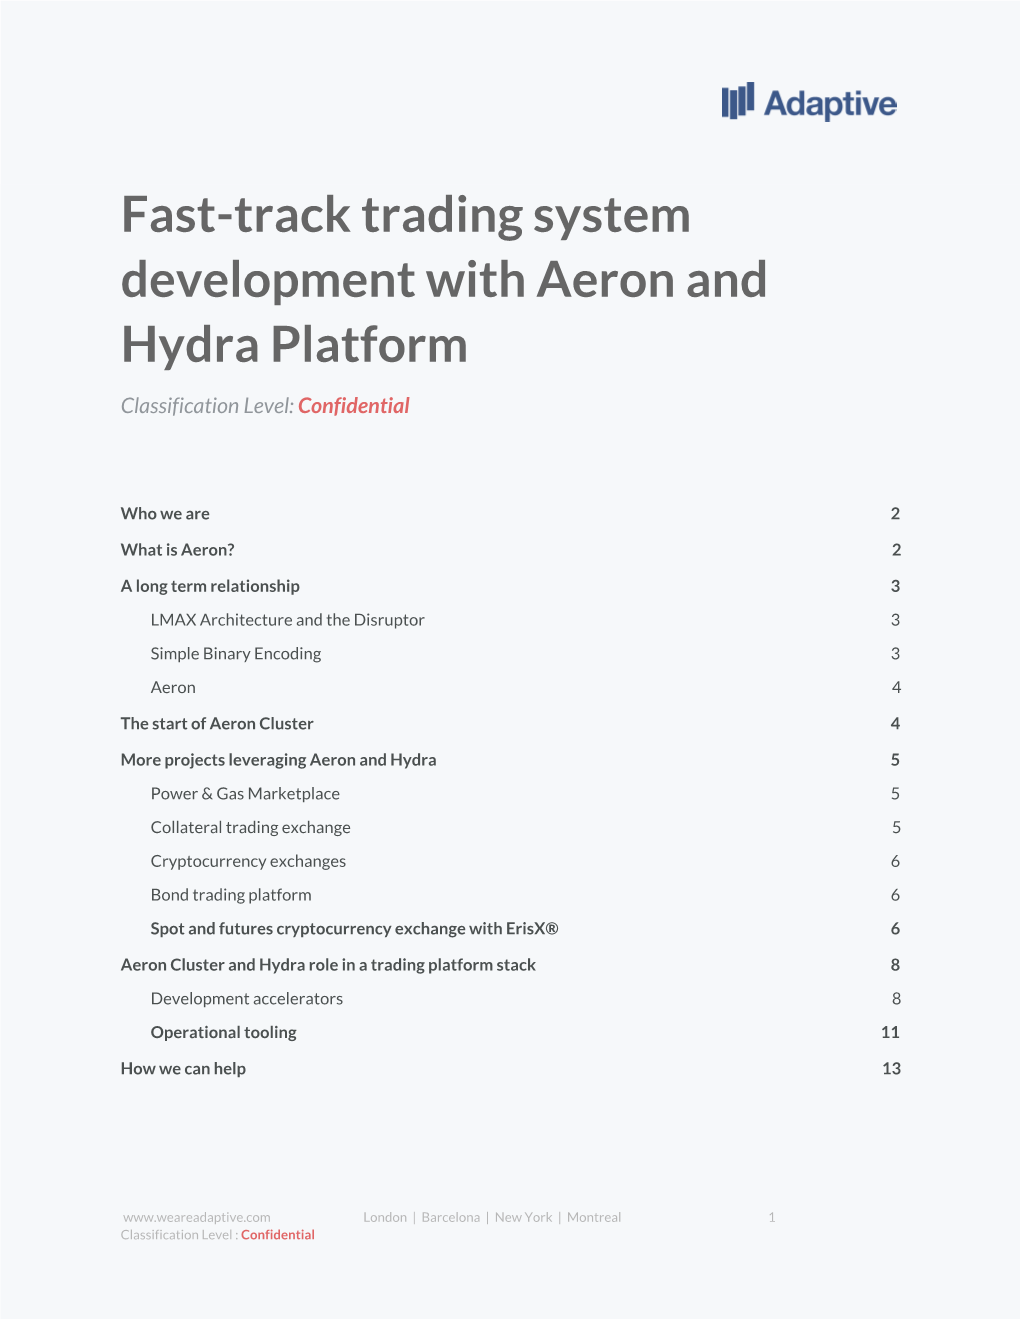 Fast-Track Trading System Development with Aeron and Hydra Platform